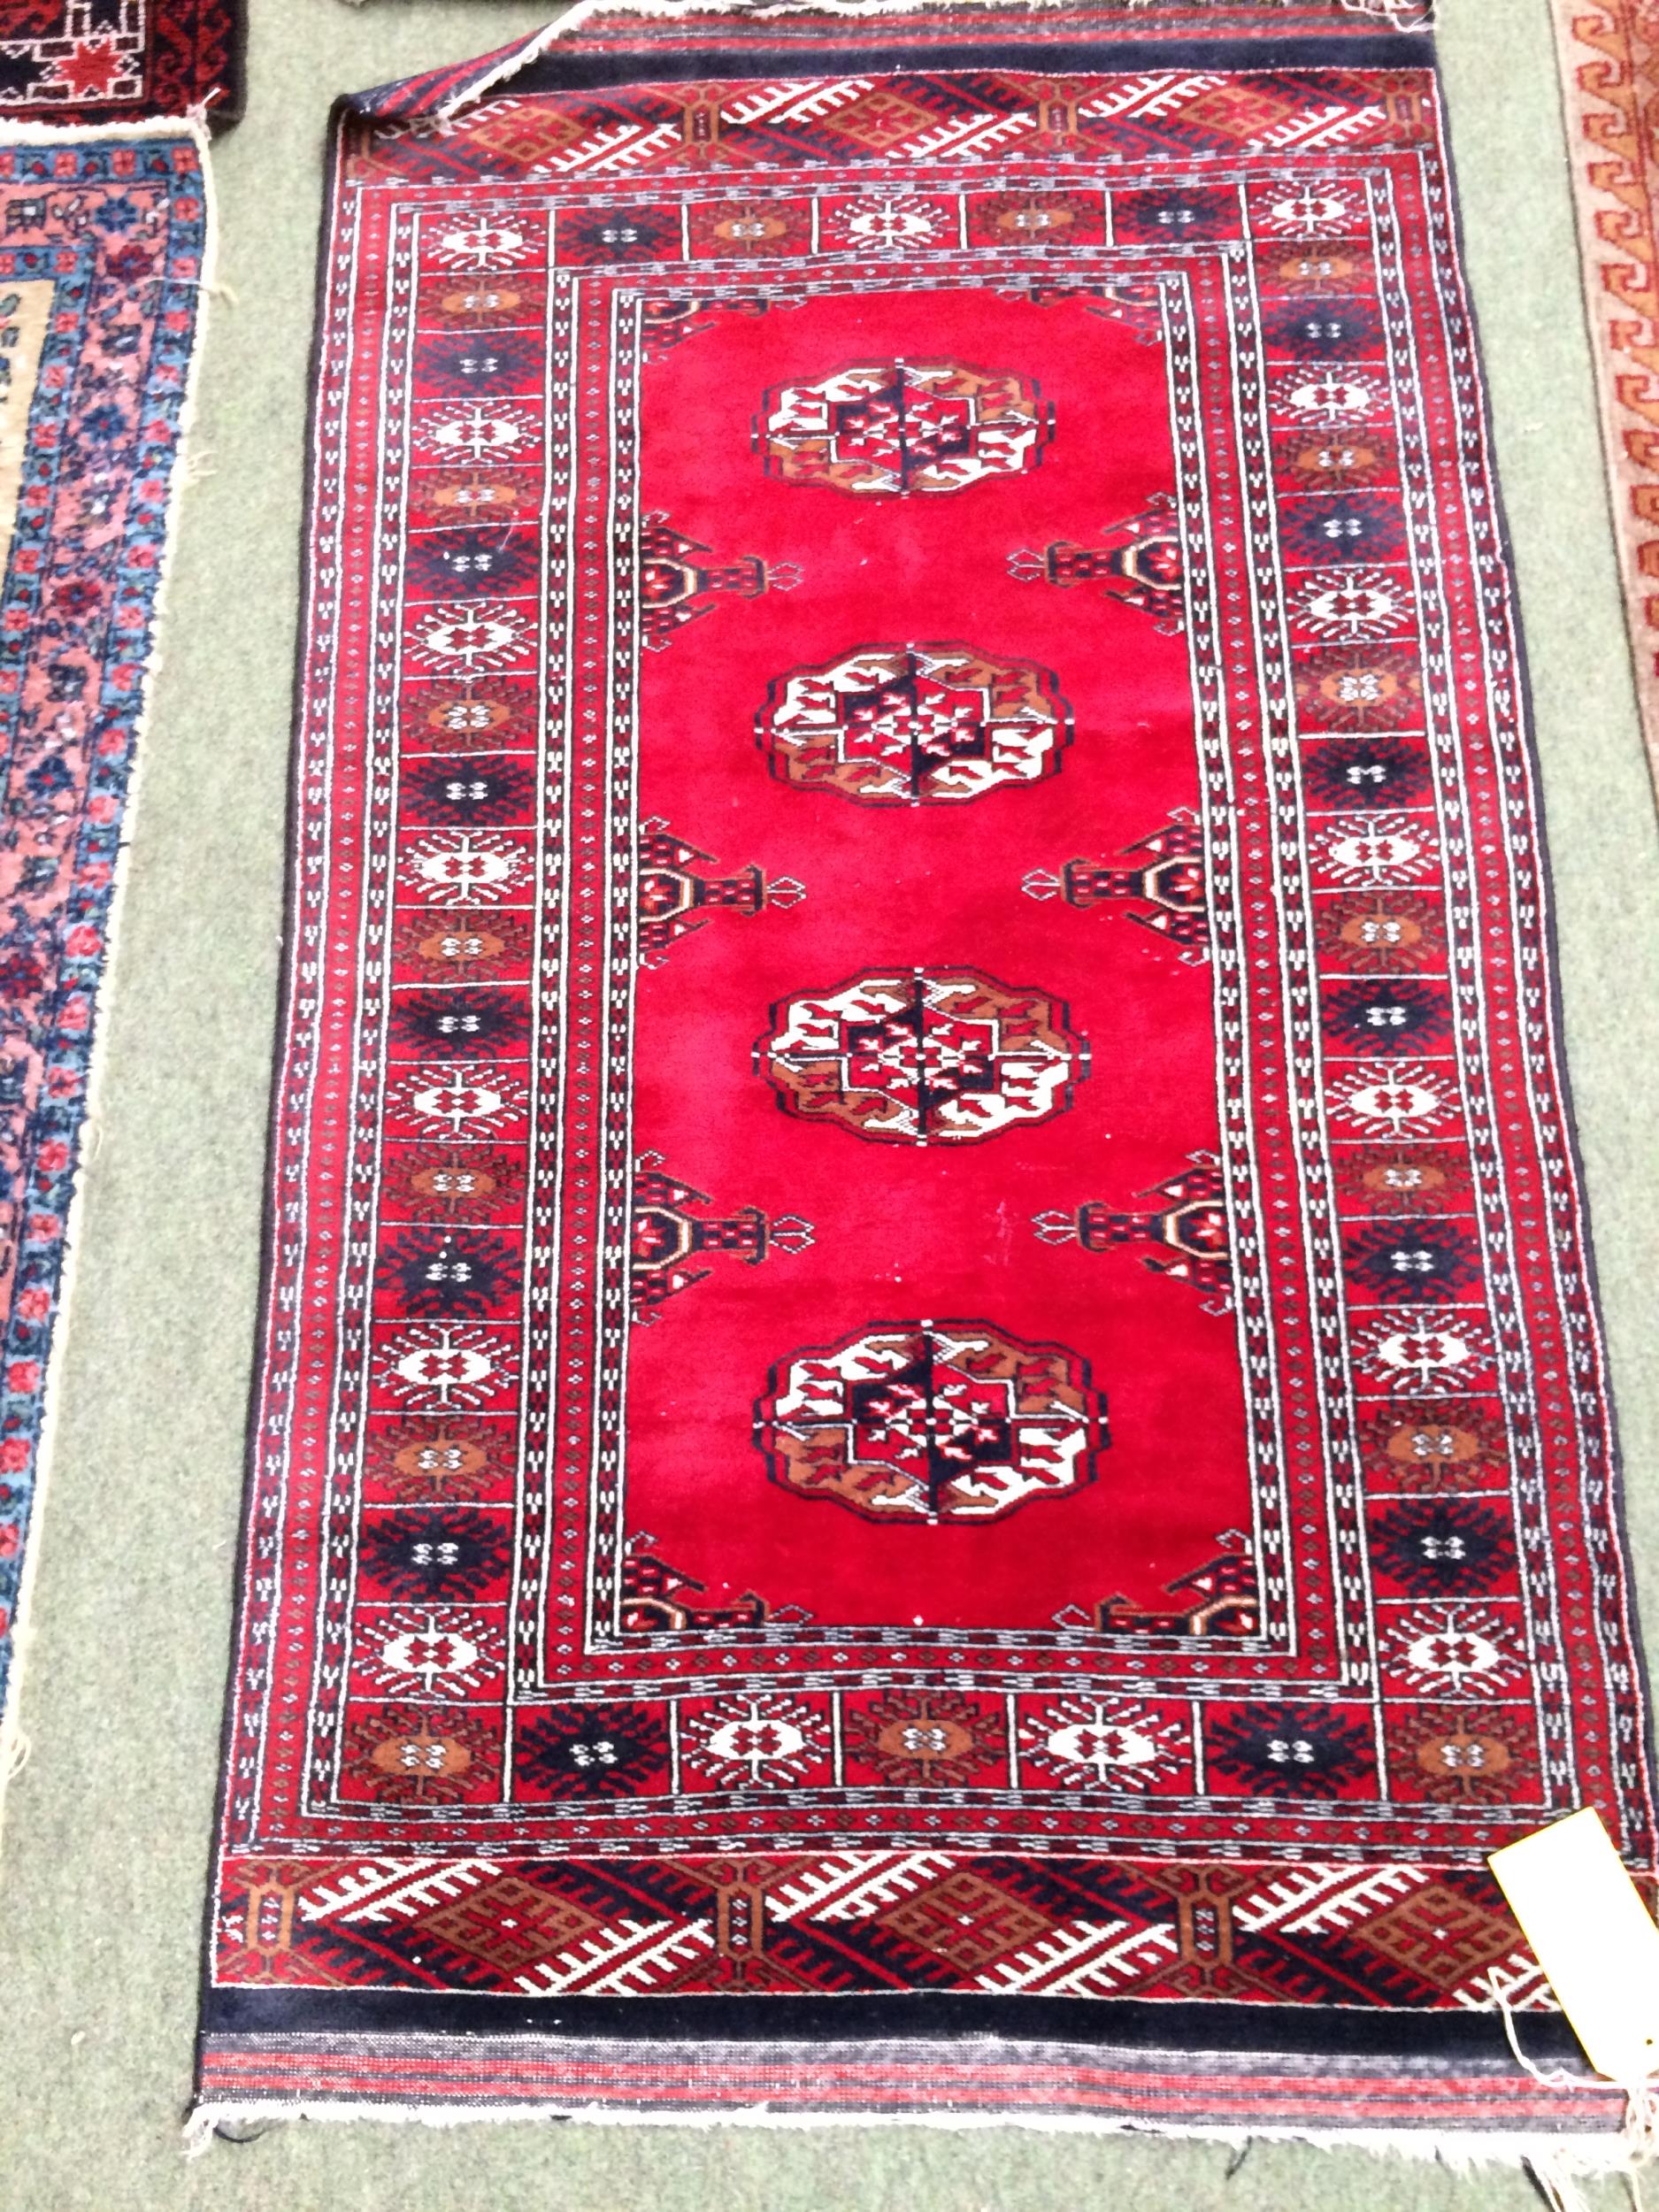 4 rugs, 3 red ground rugs with all over geometric stylized designs, and a blue and red ground Tree - Image 3 of 9